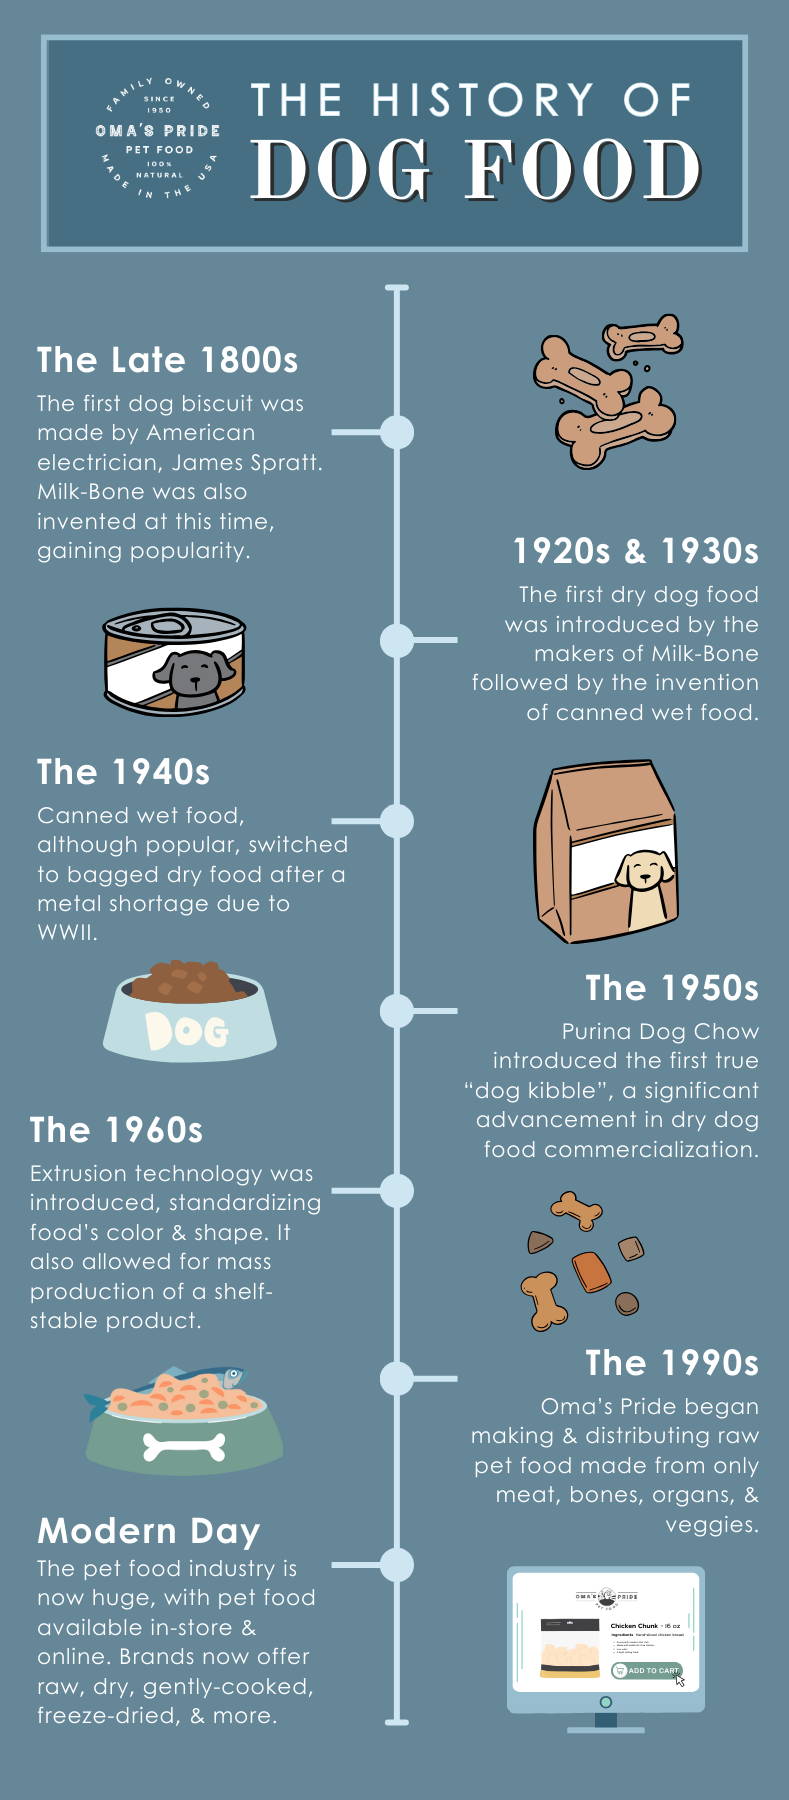 The history of dog food timeline from 1800s to modern day.